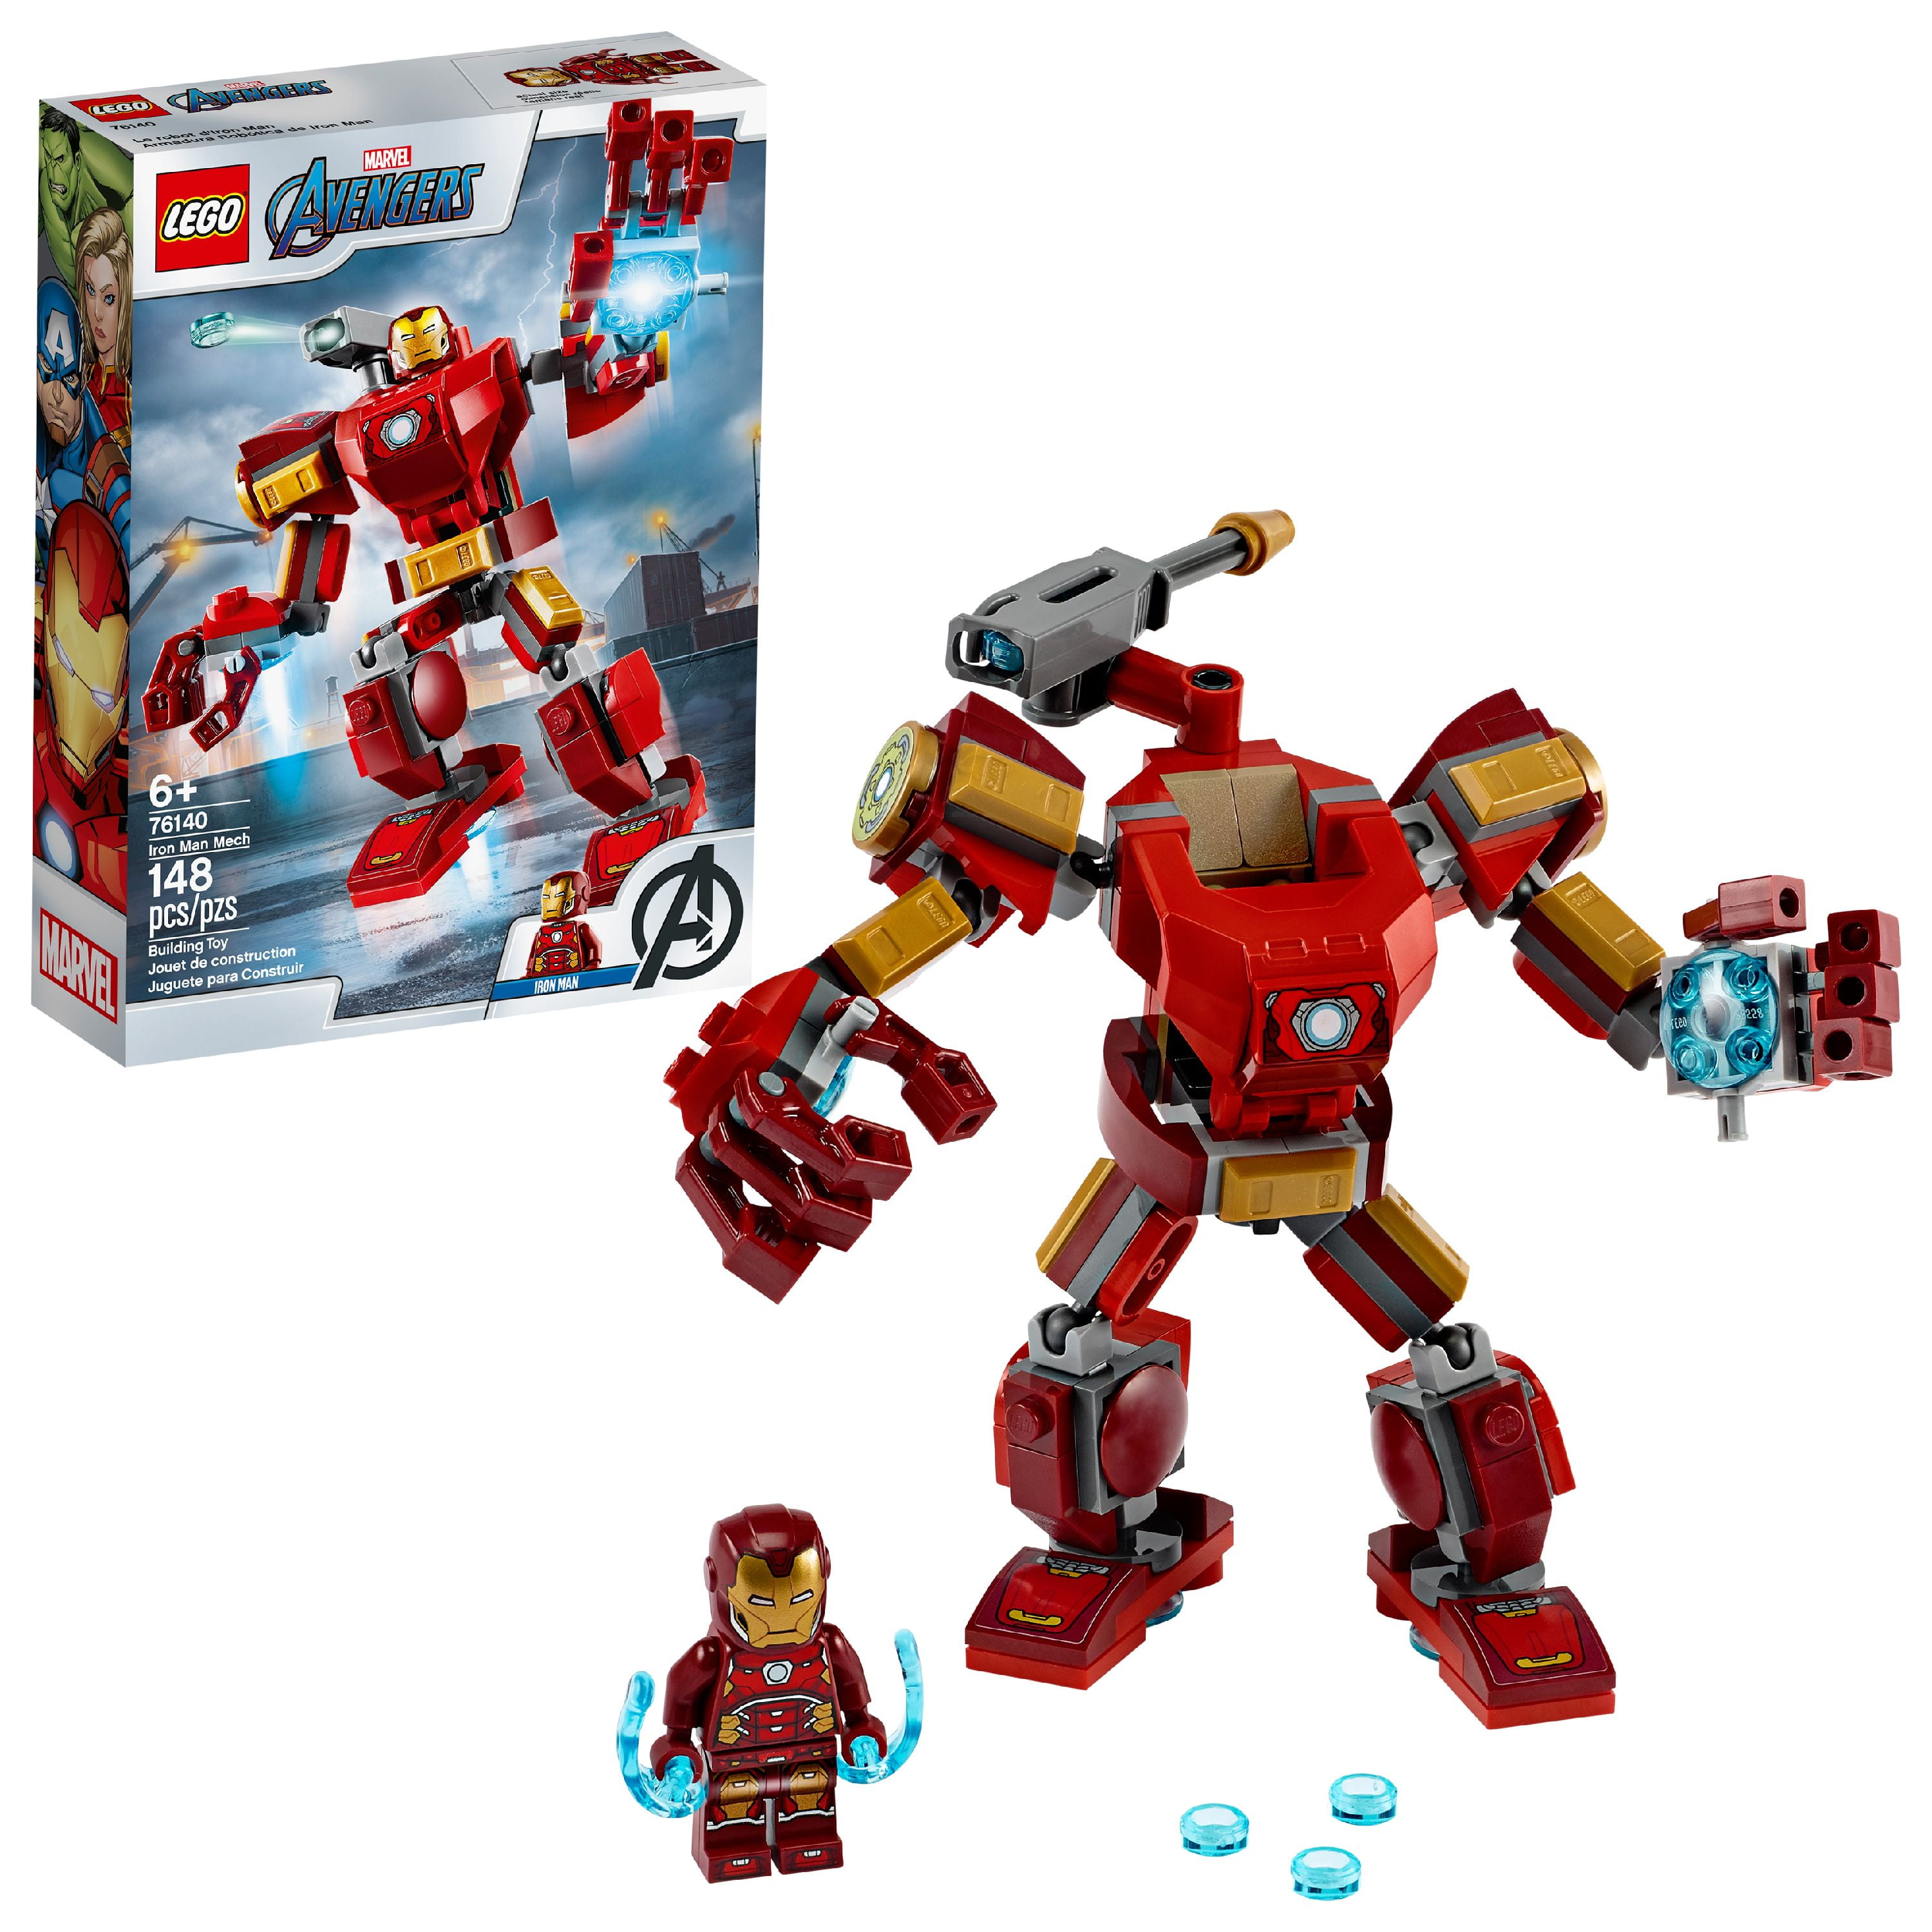 for sale online LEGO Iron Man Mech Super Heroes 76140